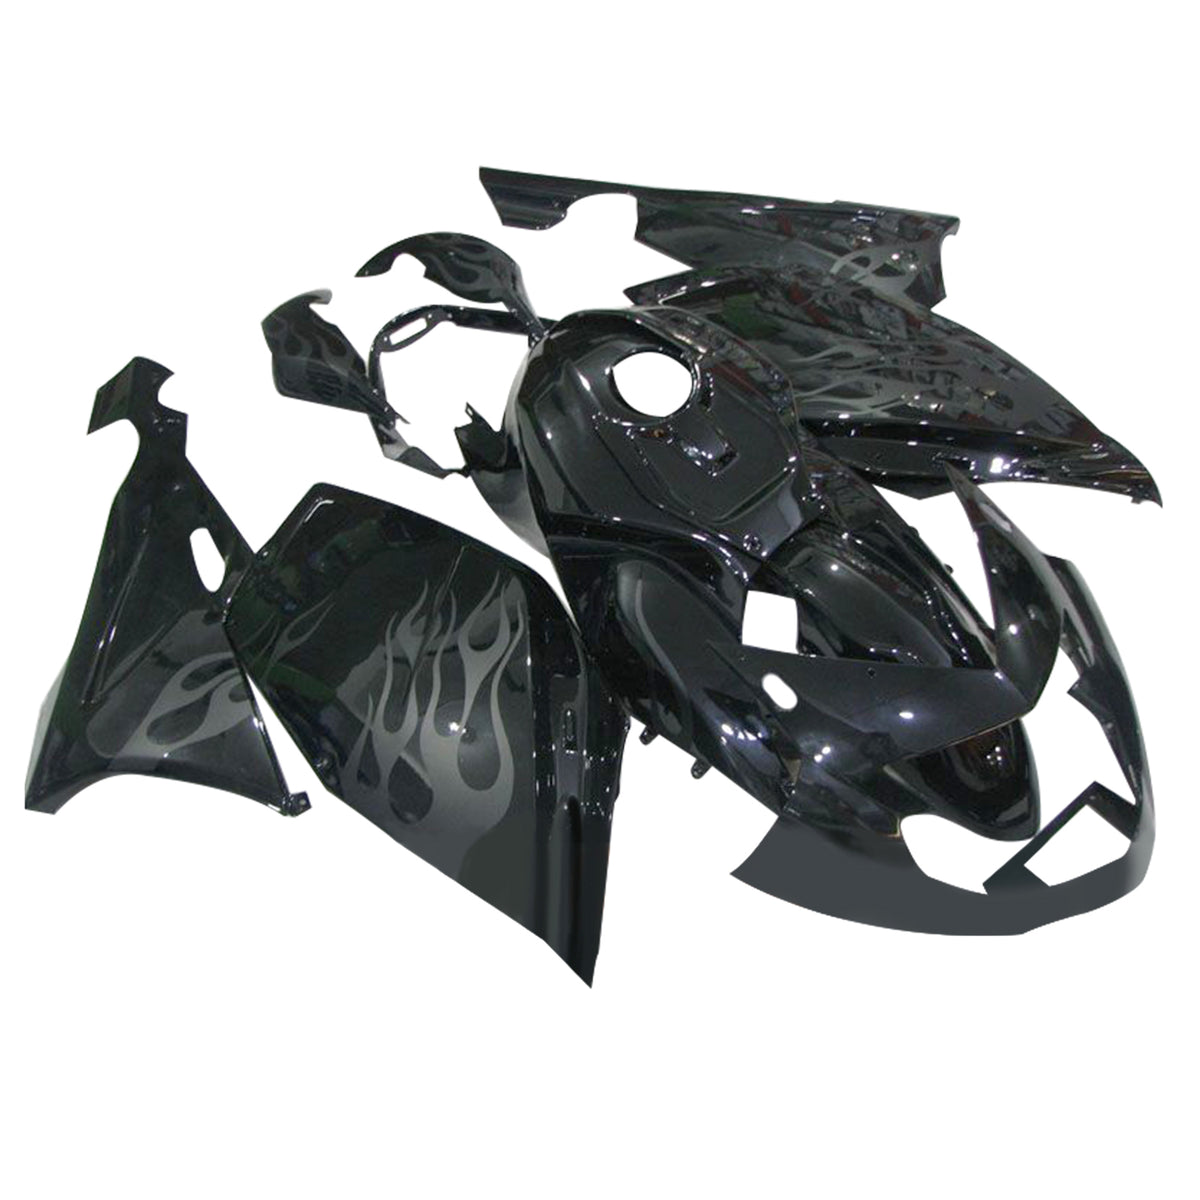 Amotopart 2005-2010 BMW K1200S Black with Flame Fairing Kit